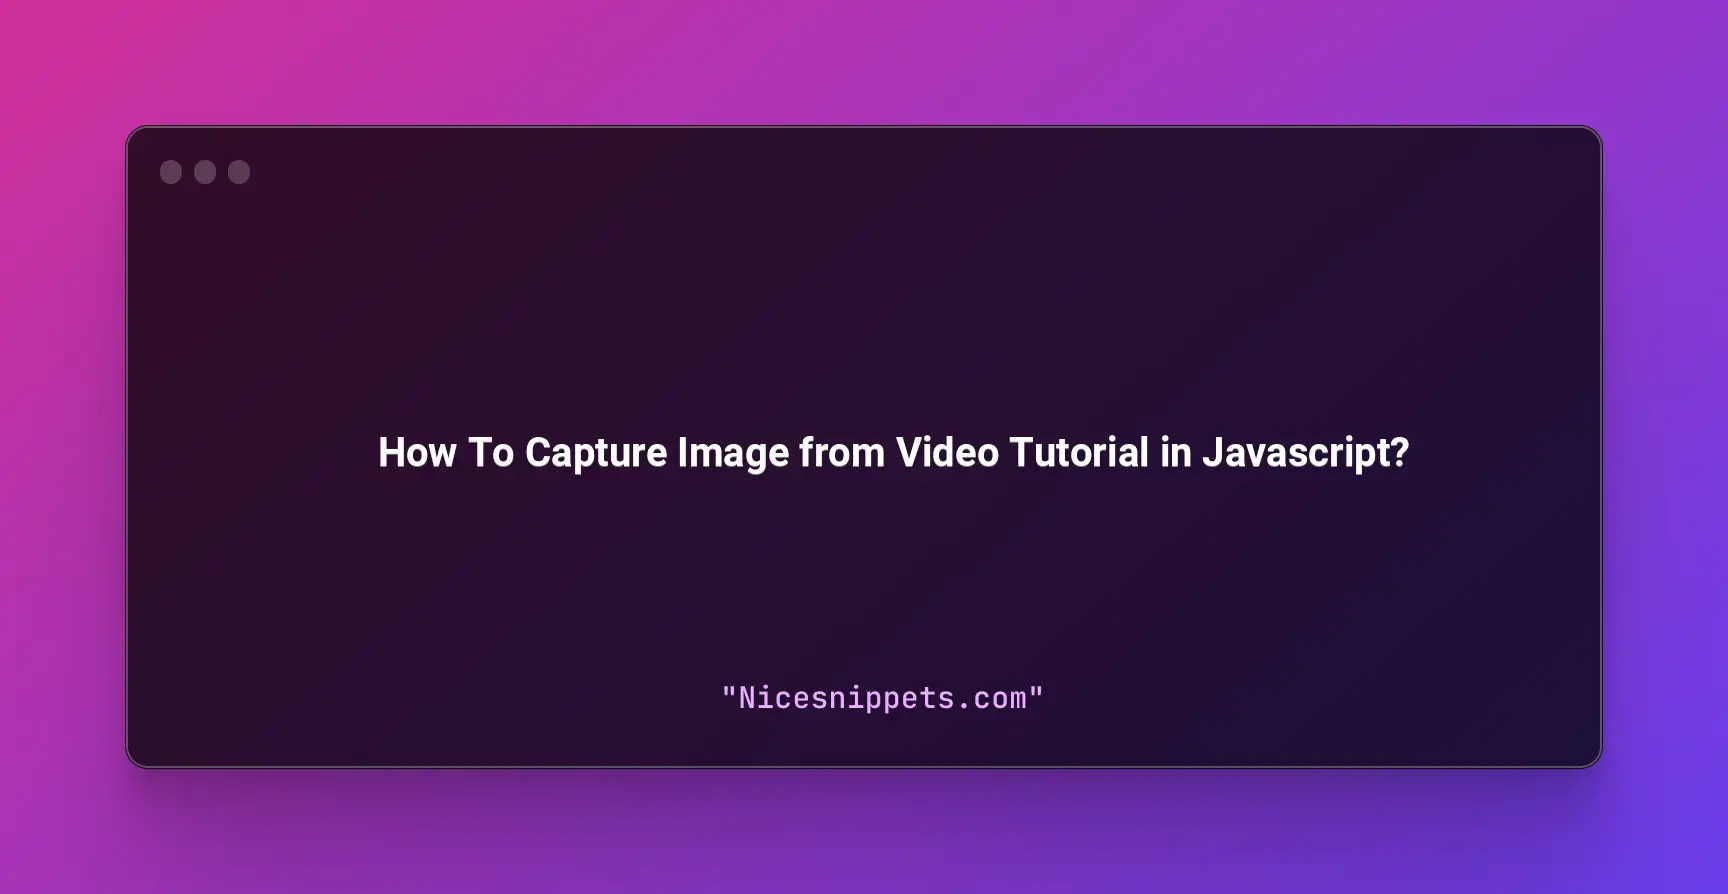 How To Capture Image from Video Tutorial in Javascript?